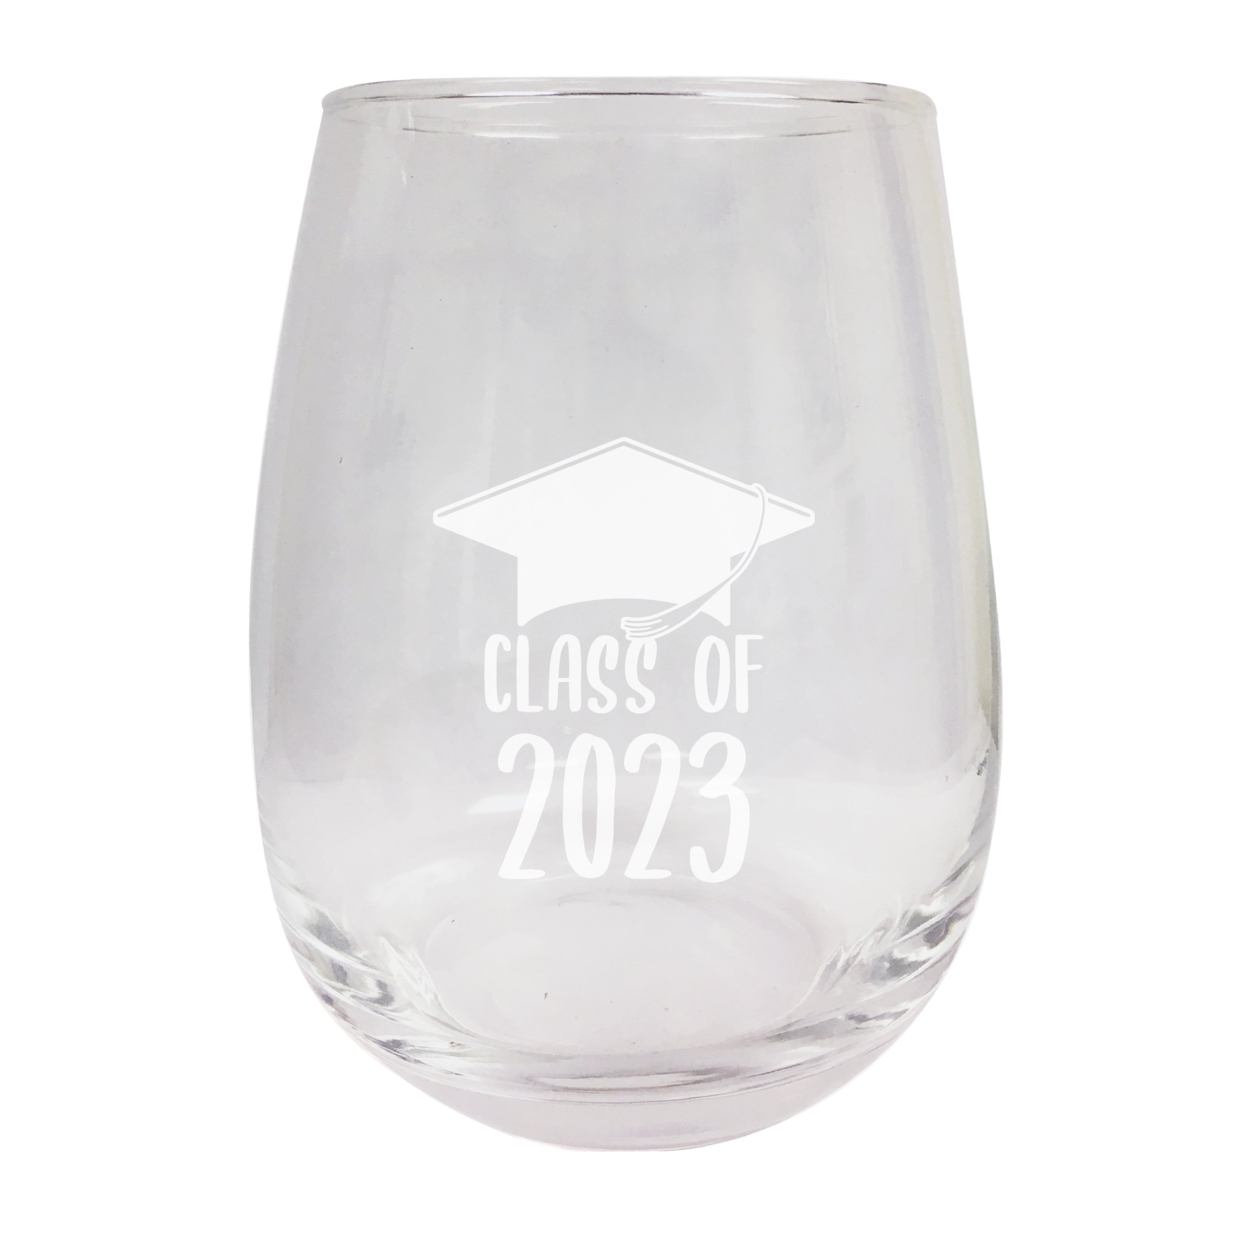 Class Of 2023 Grad Senior 15oz Etched Stemless Wine Glass - A, 2-Pack